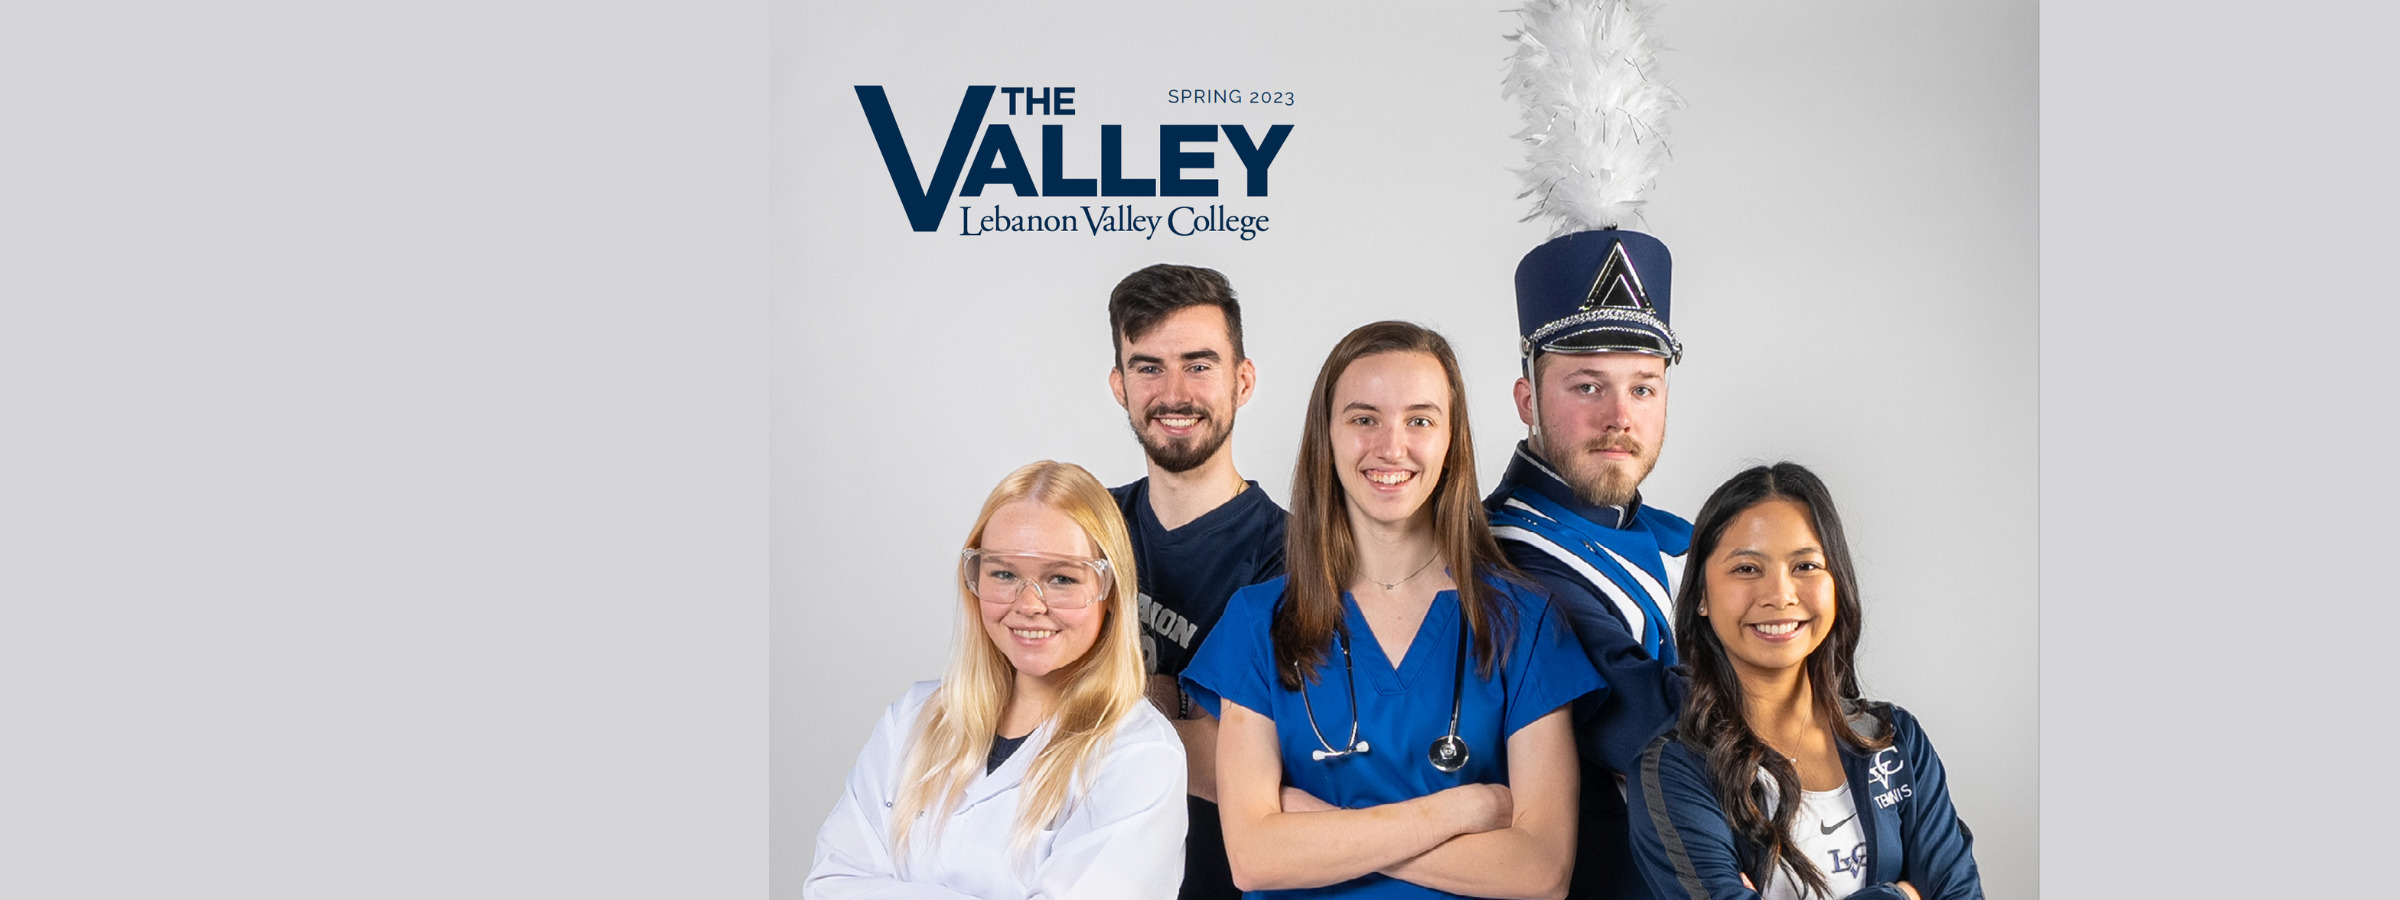 LVC student-athletes pose for magazine cover